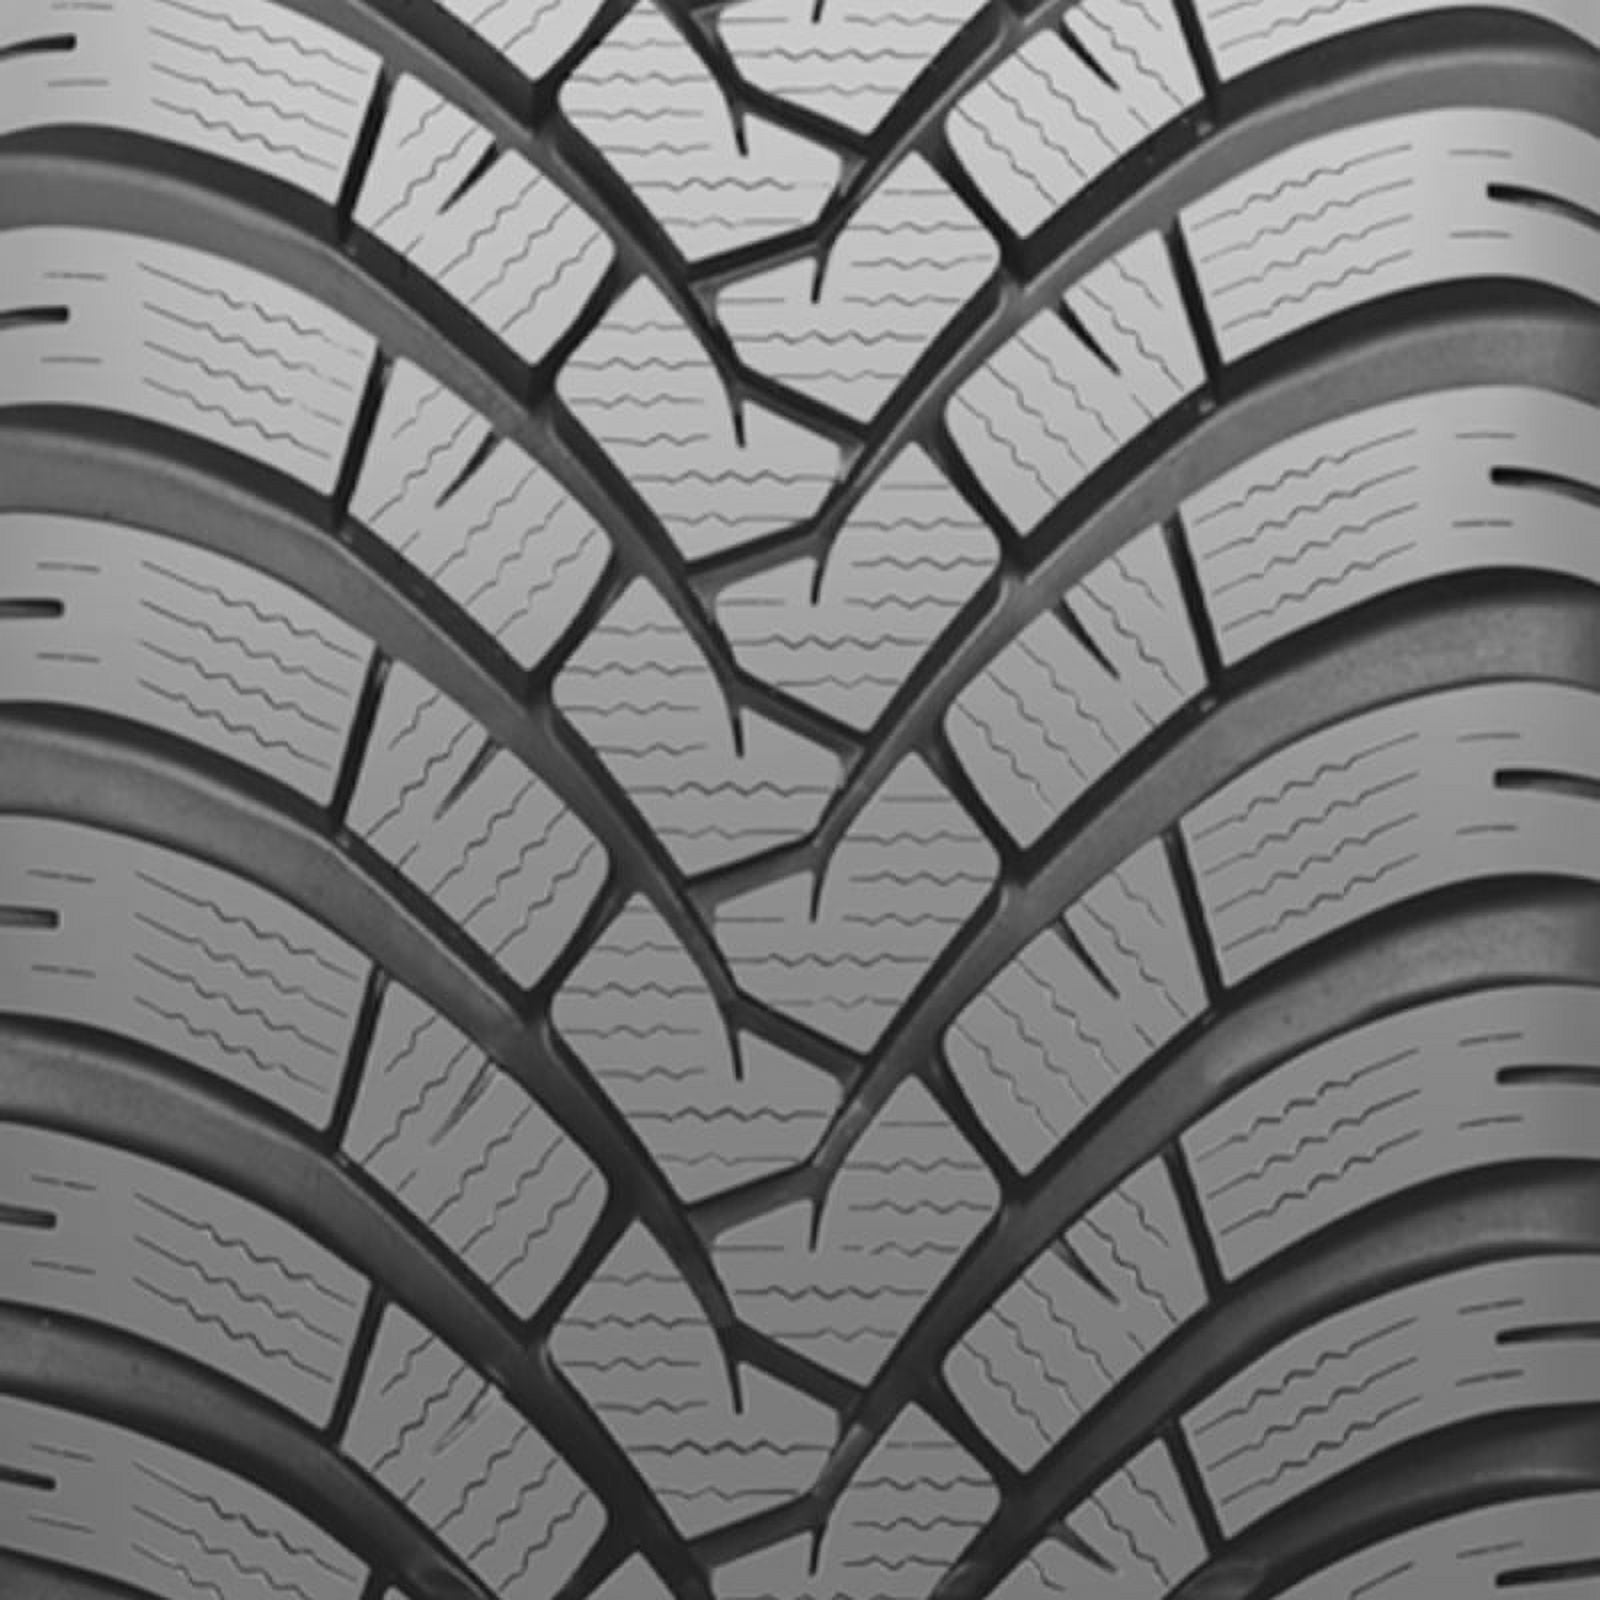 Falken Eurowinter HS01 SUV 295/40R20XL 110V BW Winter Studless Tire Fits:  1997 Plymouth Prowler Base